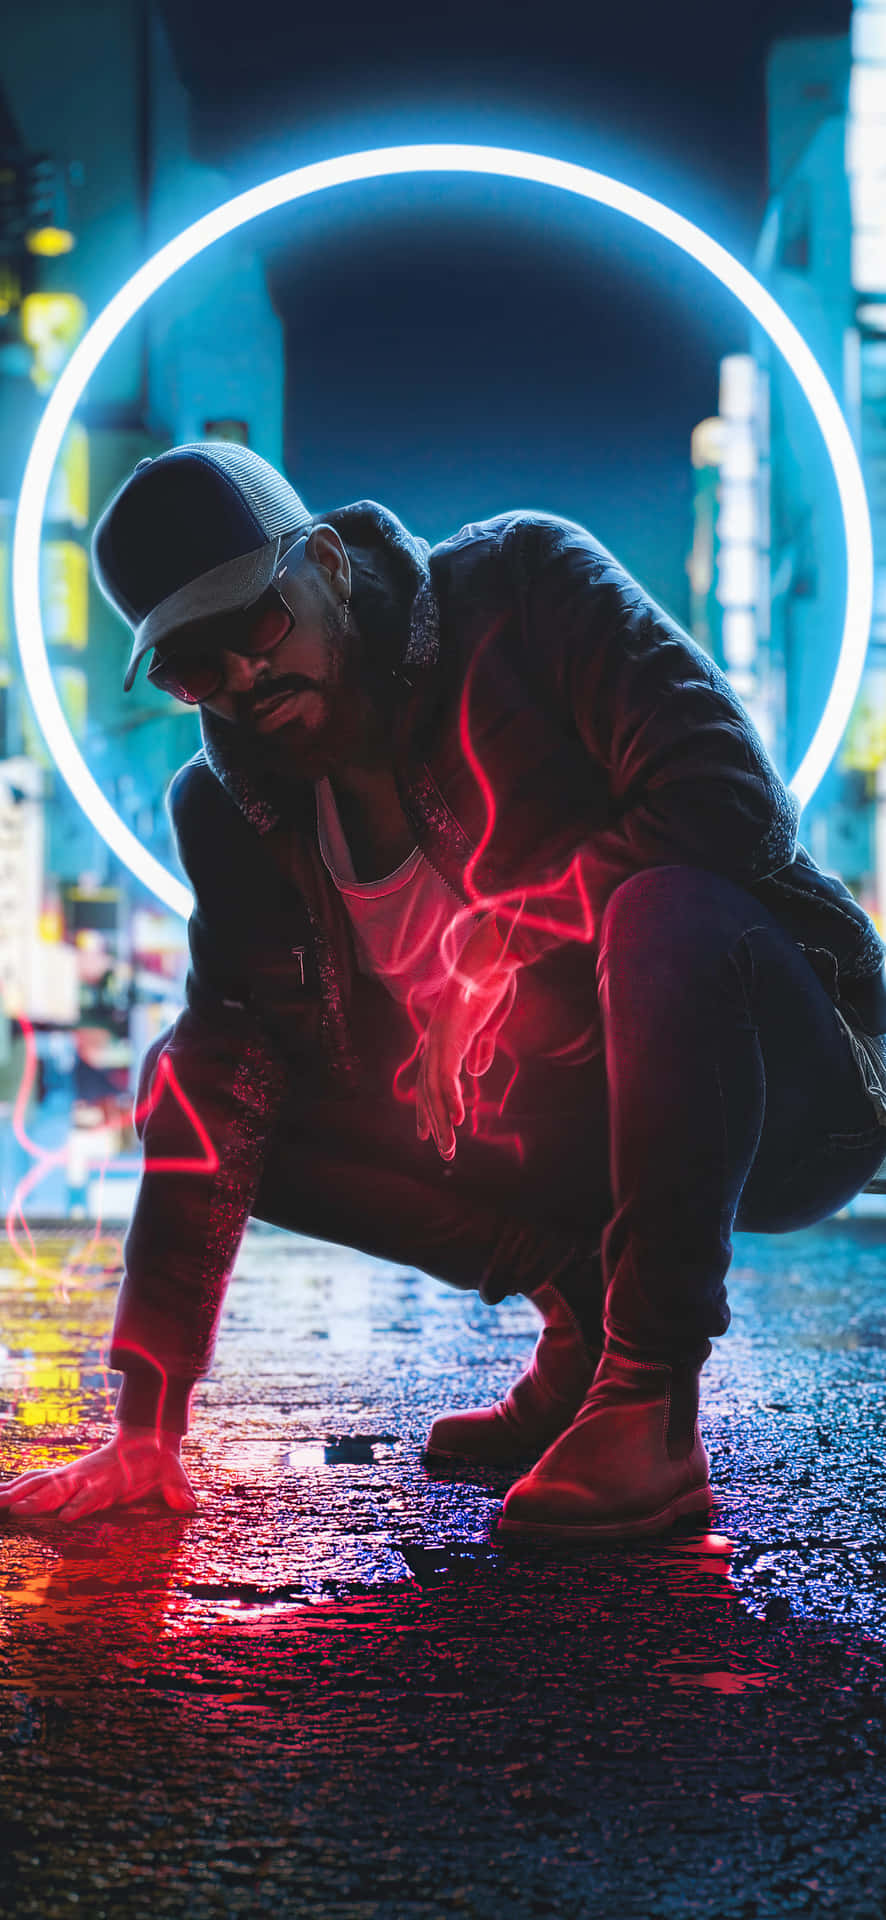 A Man Kneeling On The Street With A Neon Light Wallpaper